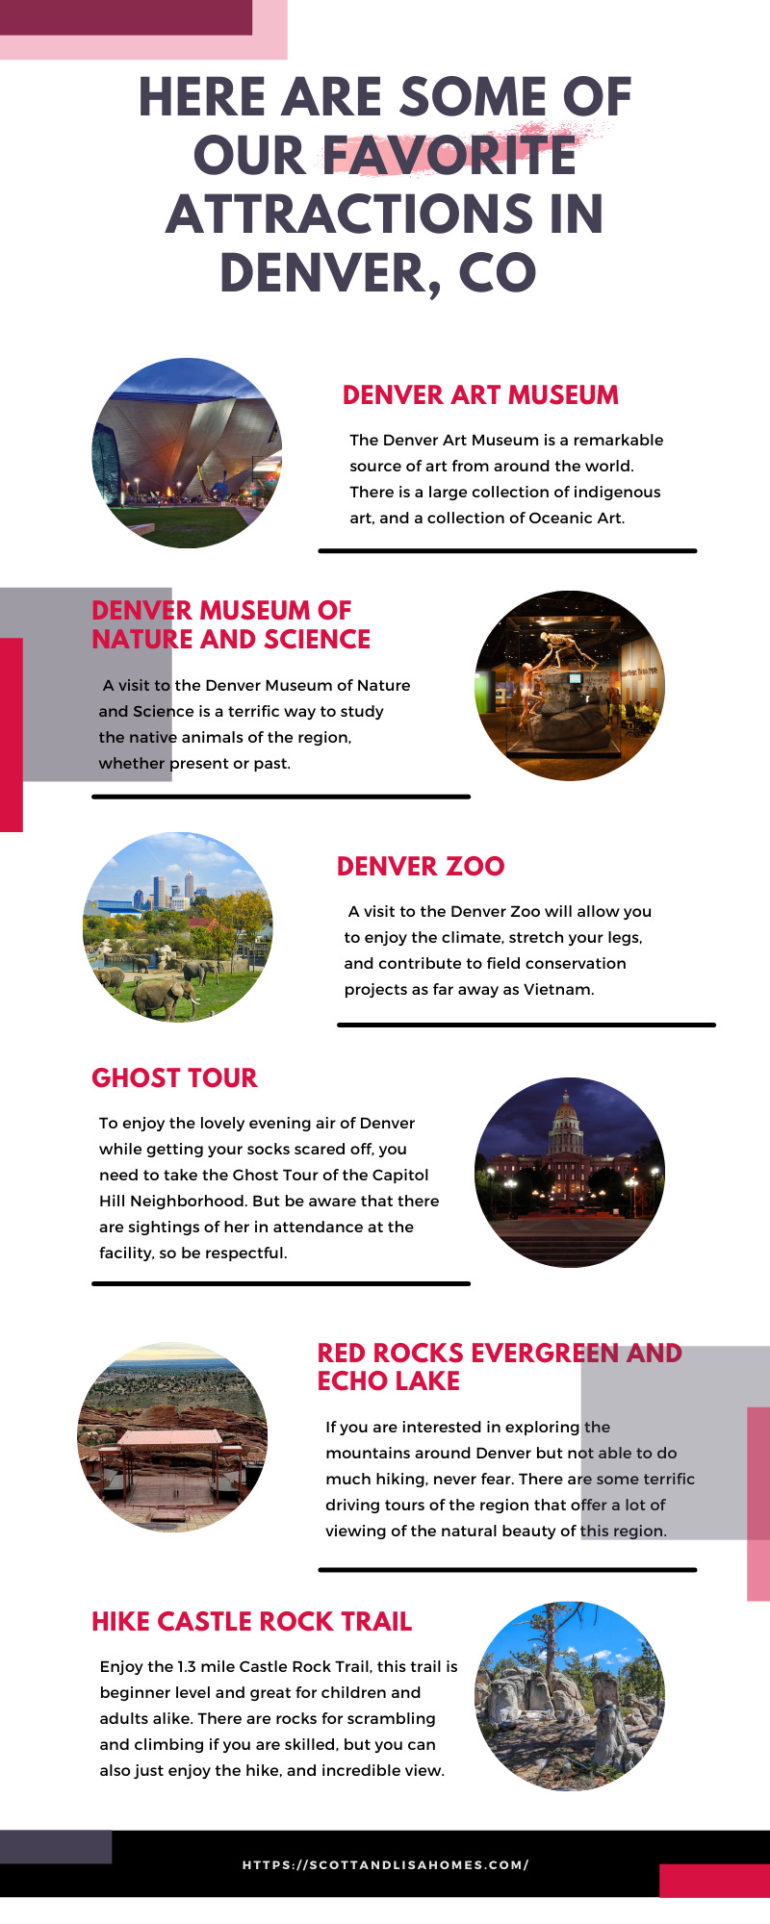 Here are Some of Our Favorite Attractions in Denver, CO